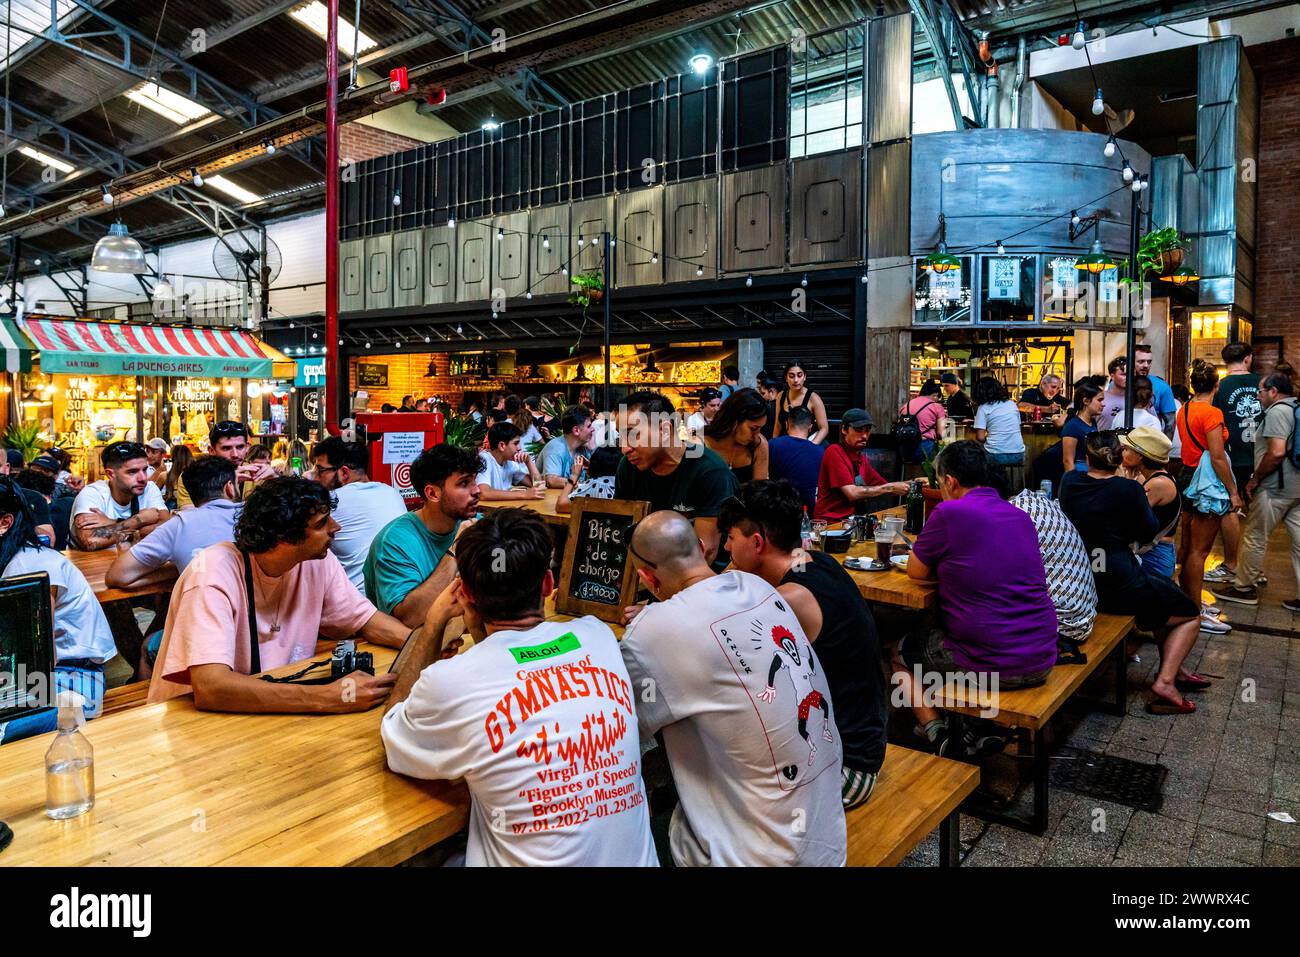 People Sitting Down Eating At A Cafe In The San Telmo Indoor Market (Mercado de San Telmo), Buenos Aires, Argentina. Stock Photo